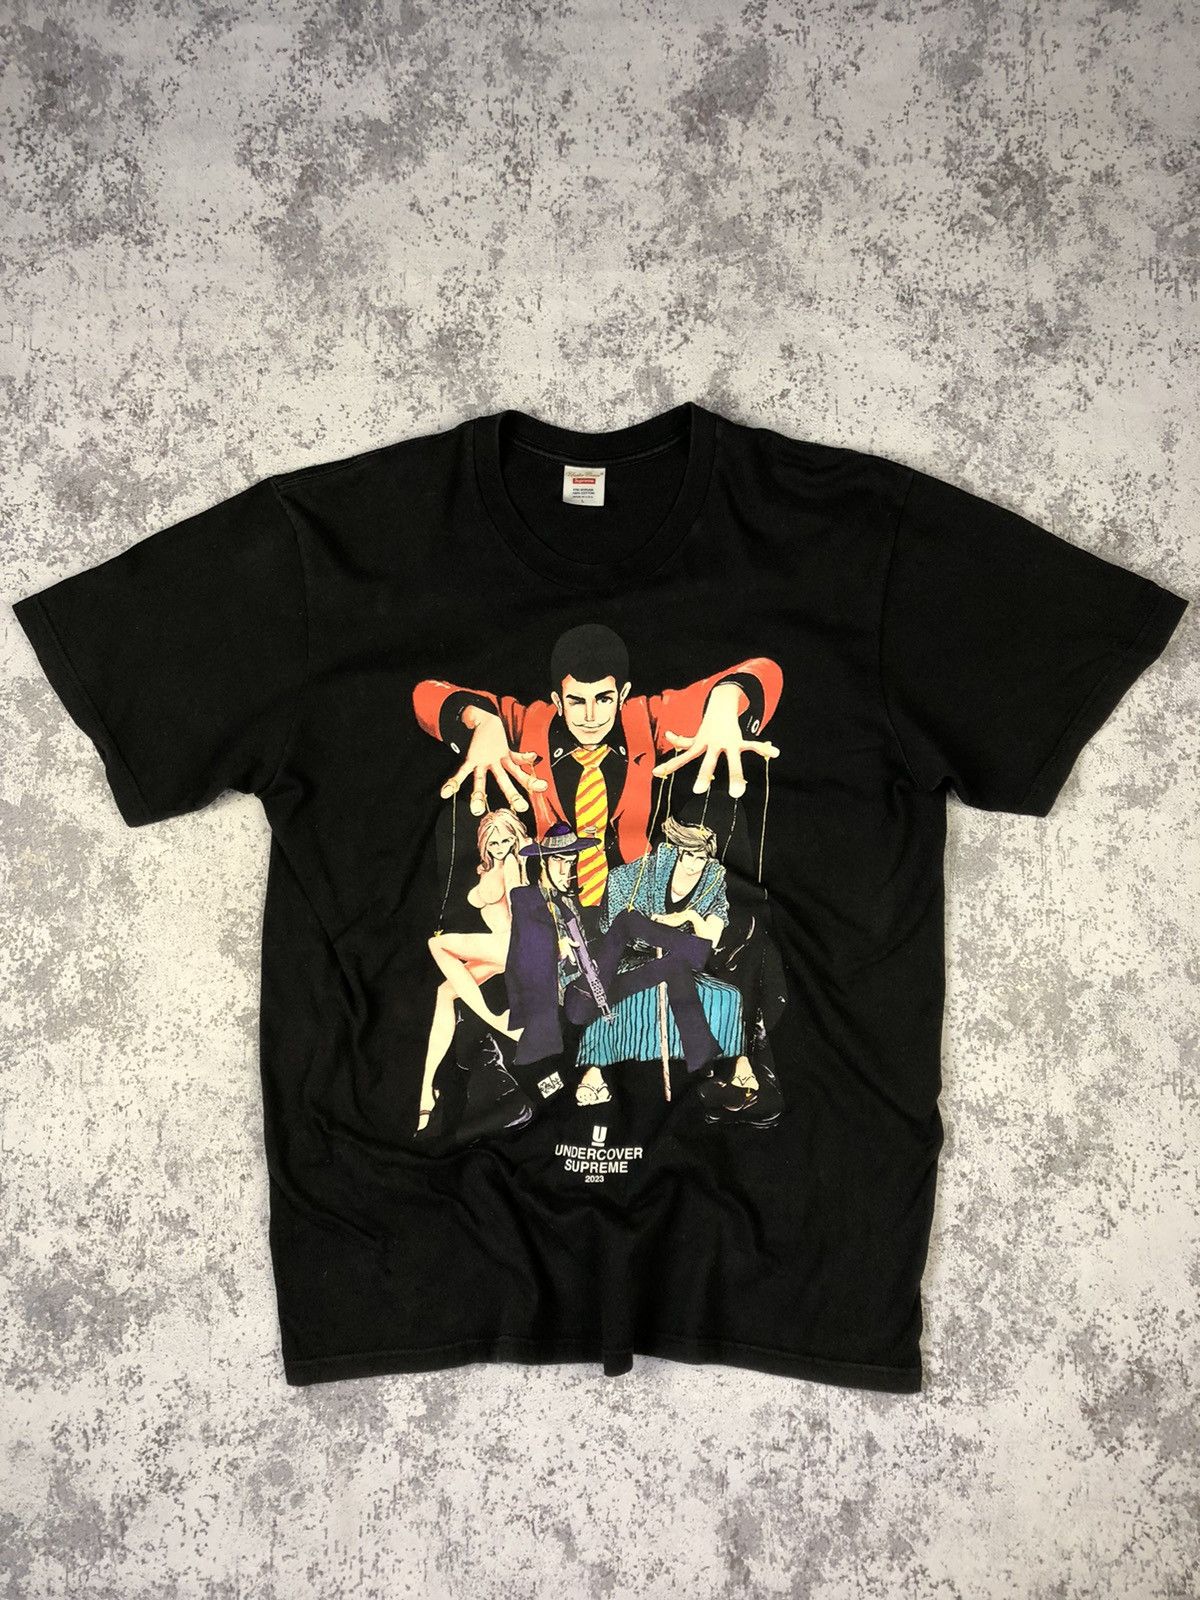 Supreme Undercover Lupin T Shirt | Grailed